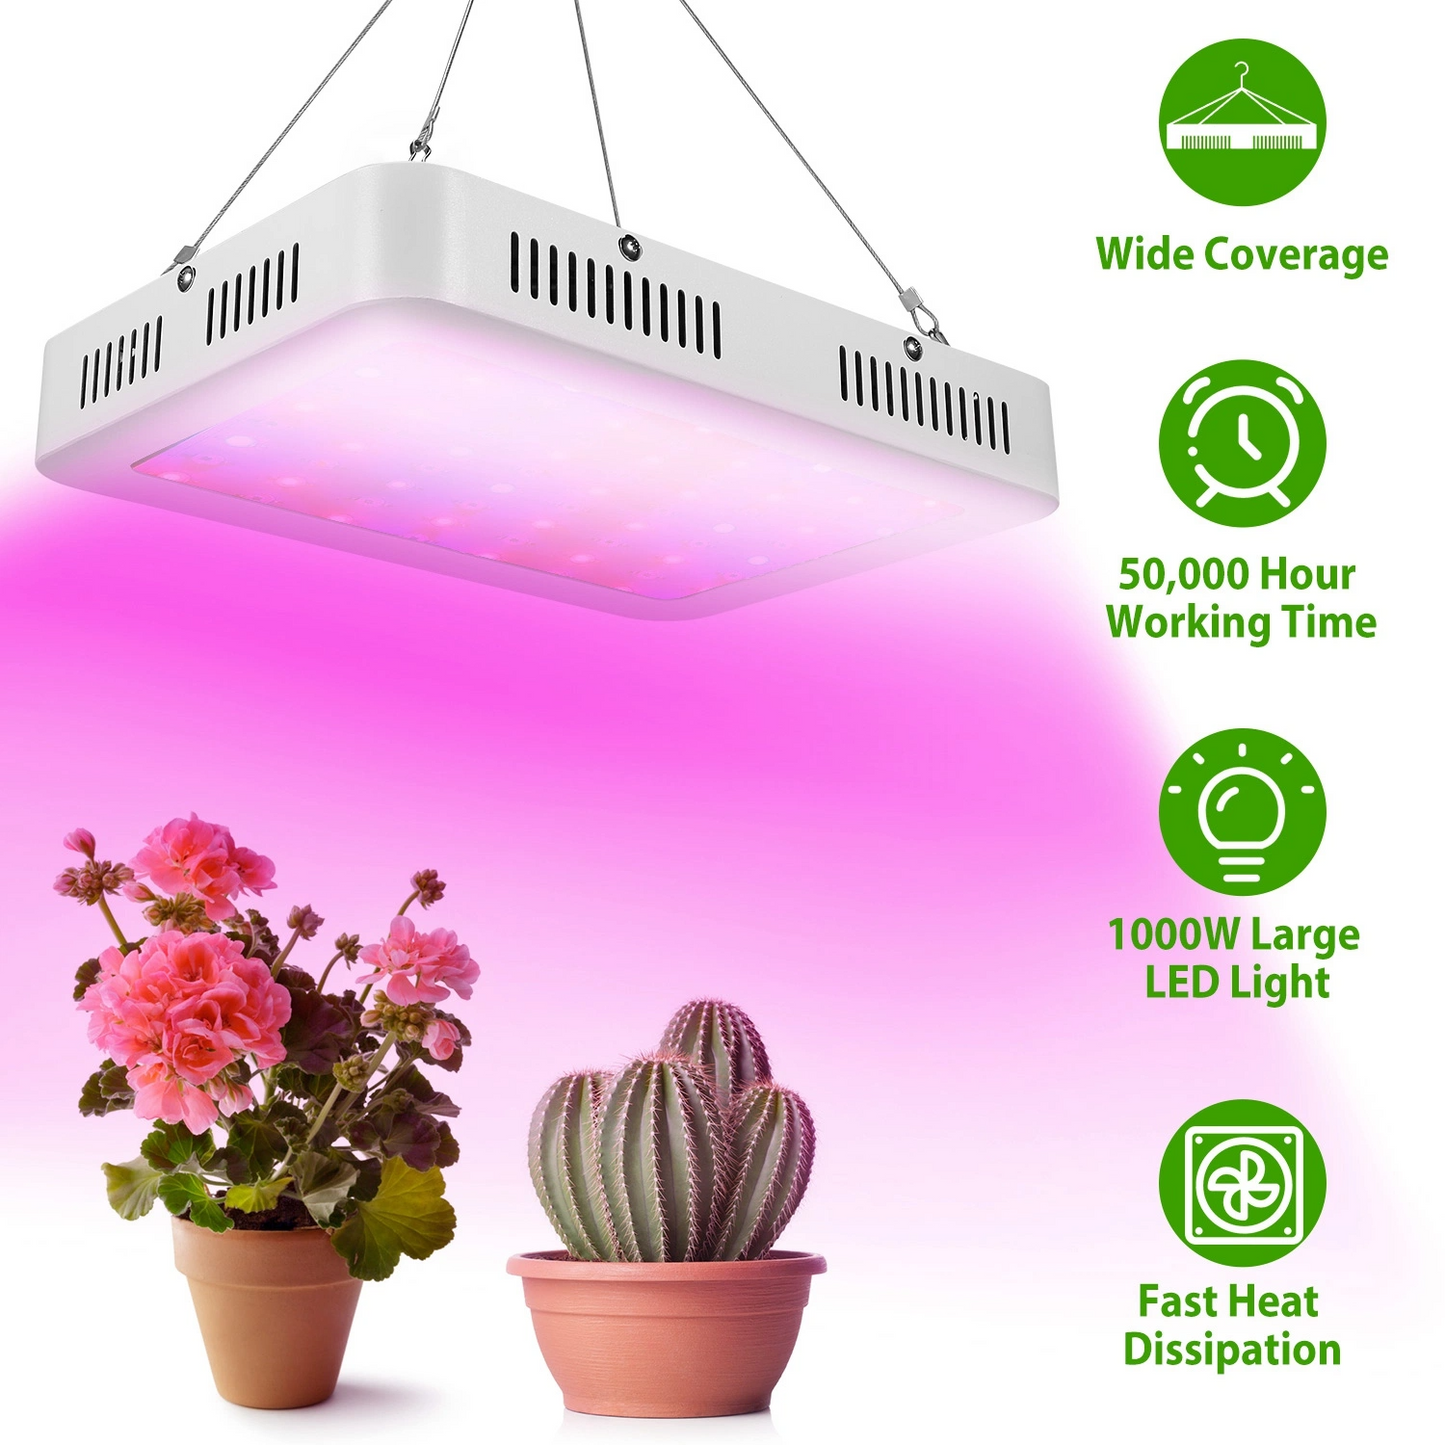 1000W LED Grow Light with Dual Chips - Full Spectrum 380-800nm Plant Lamp with Bloom & Veg Dimmers